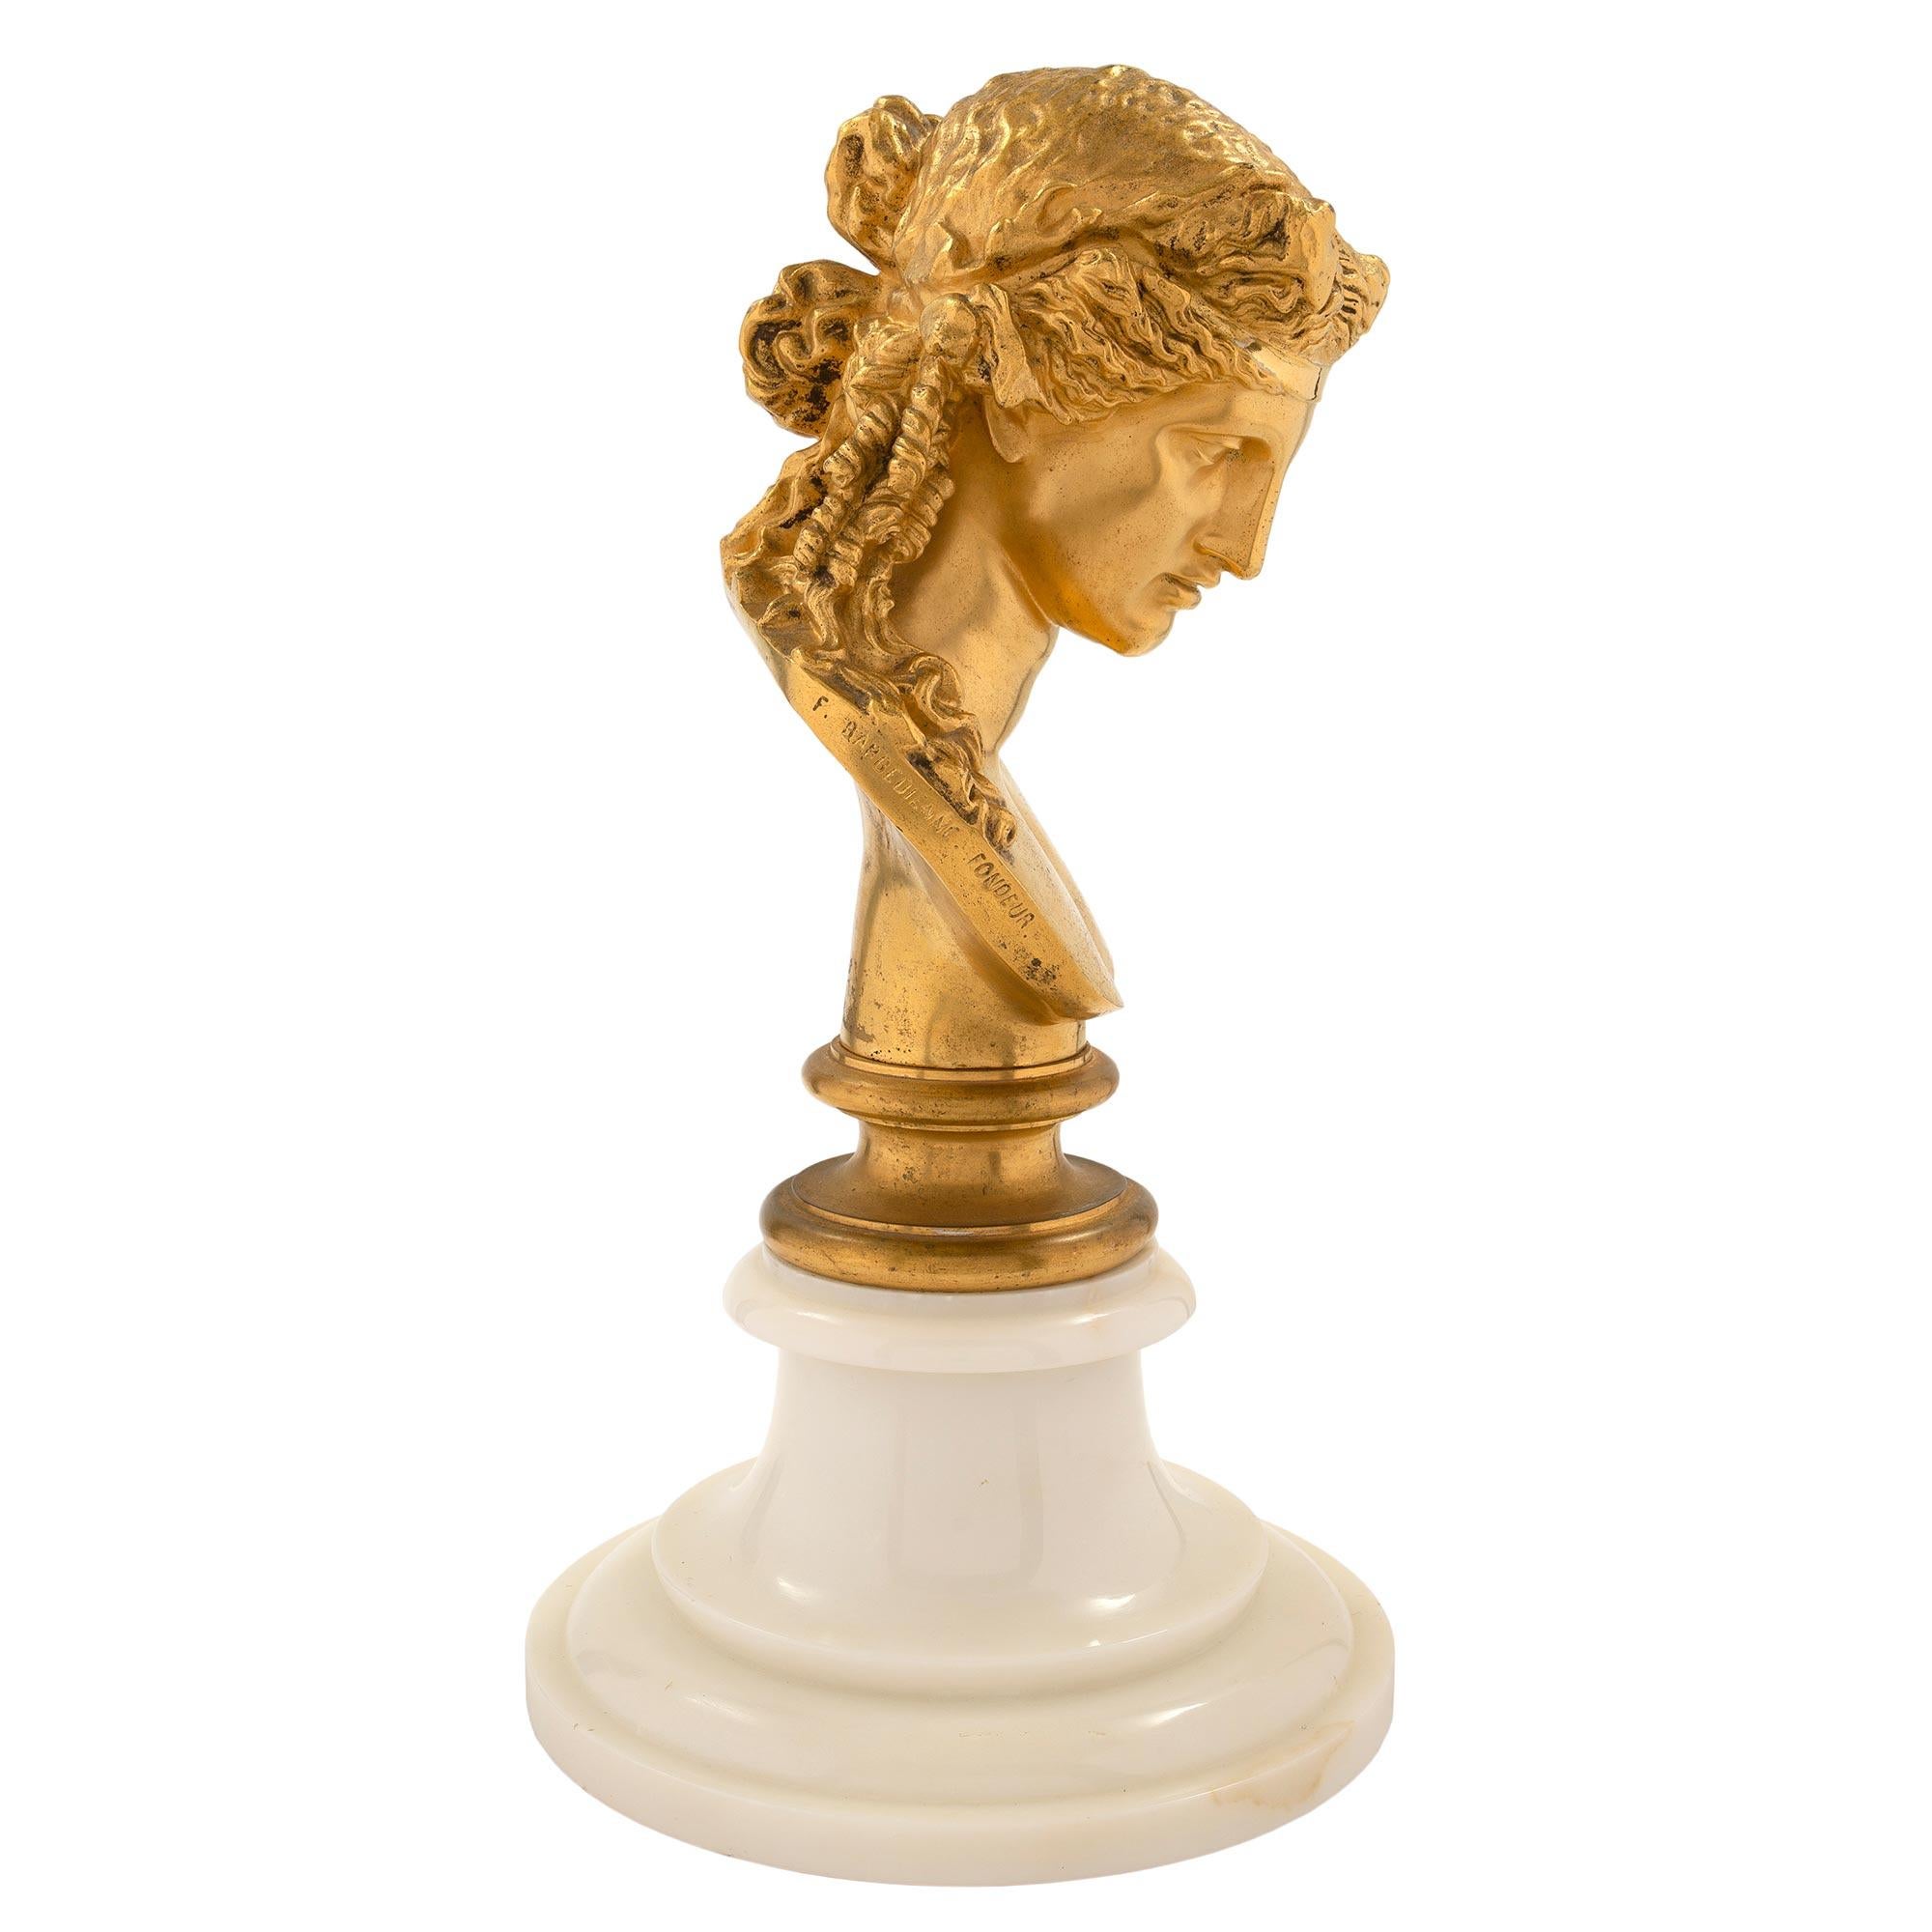 An elegant and high quality French 19th century Louis XVI st. ormolu bust of Venus, signed F. BARBEDIENNE FONDEUR. The statue is raised by a circular mottled white Carrara marble base with a stepped design. Above is the finely detailed ormolu statue